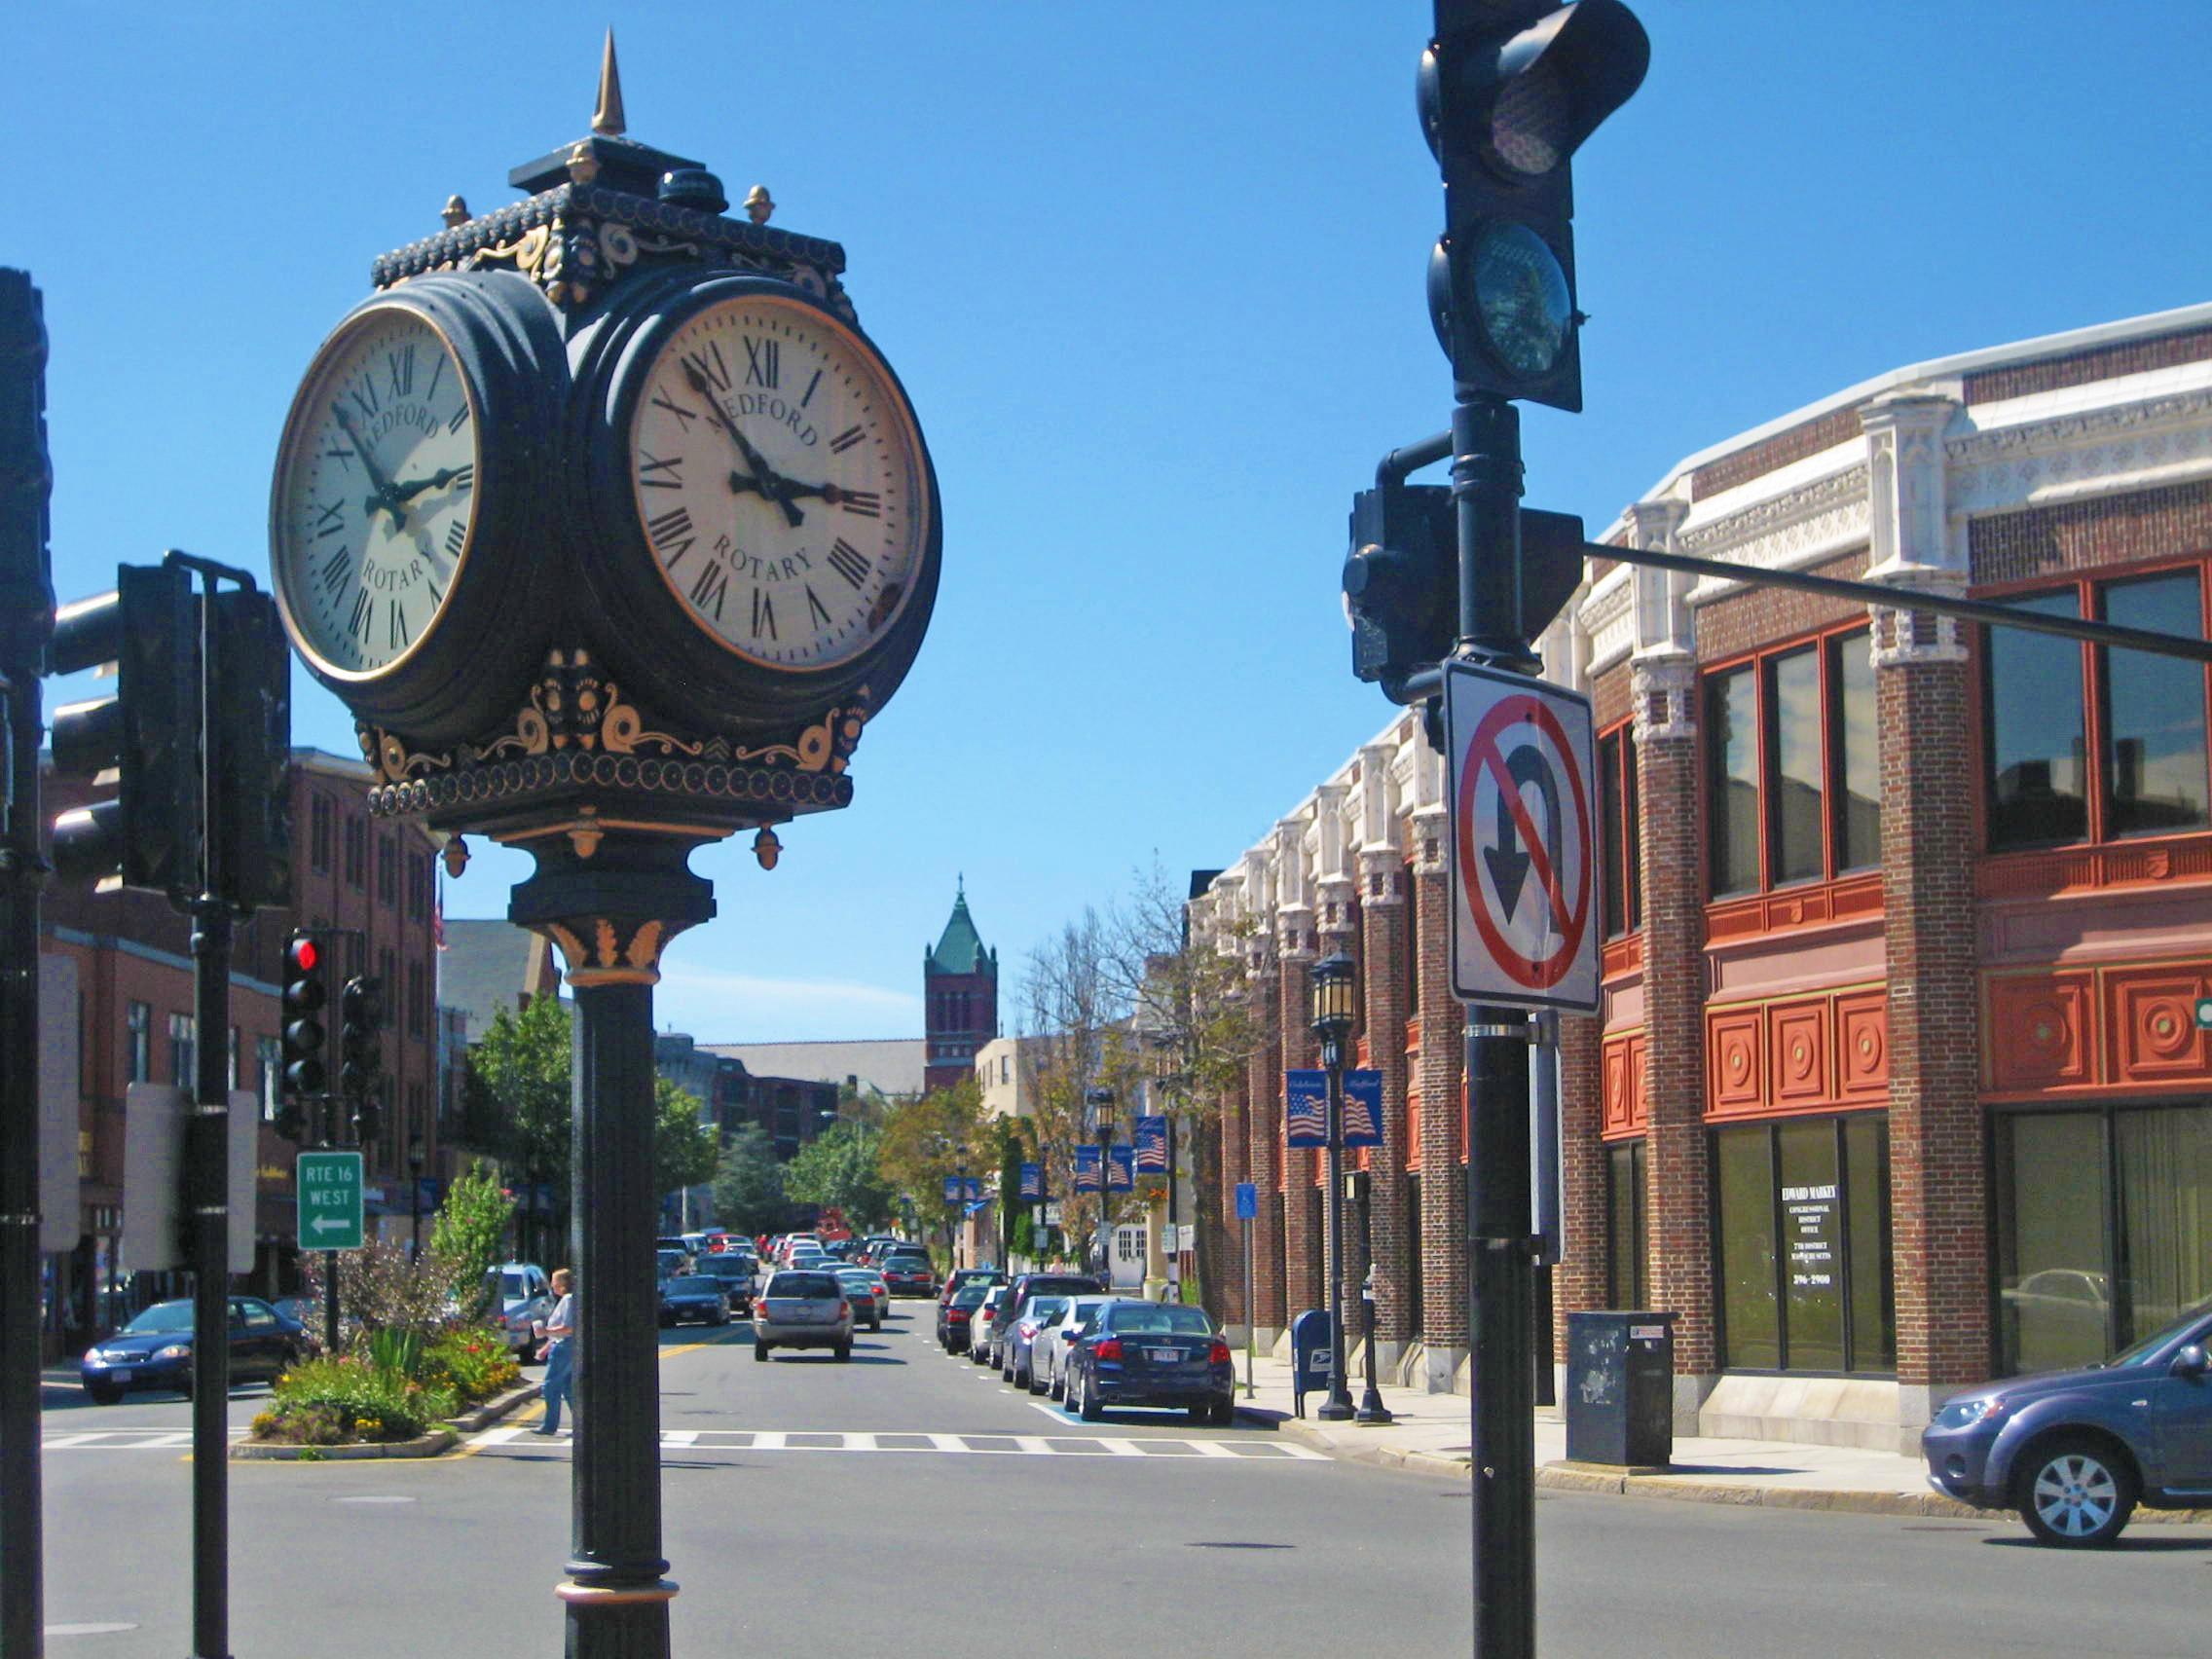 Medford Square, with a large clock in the foreground